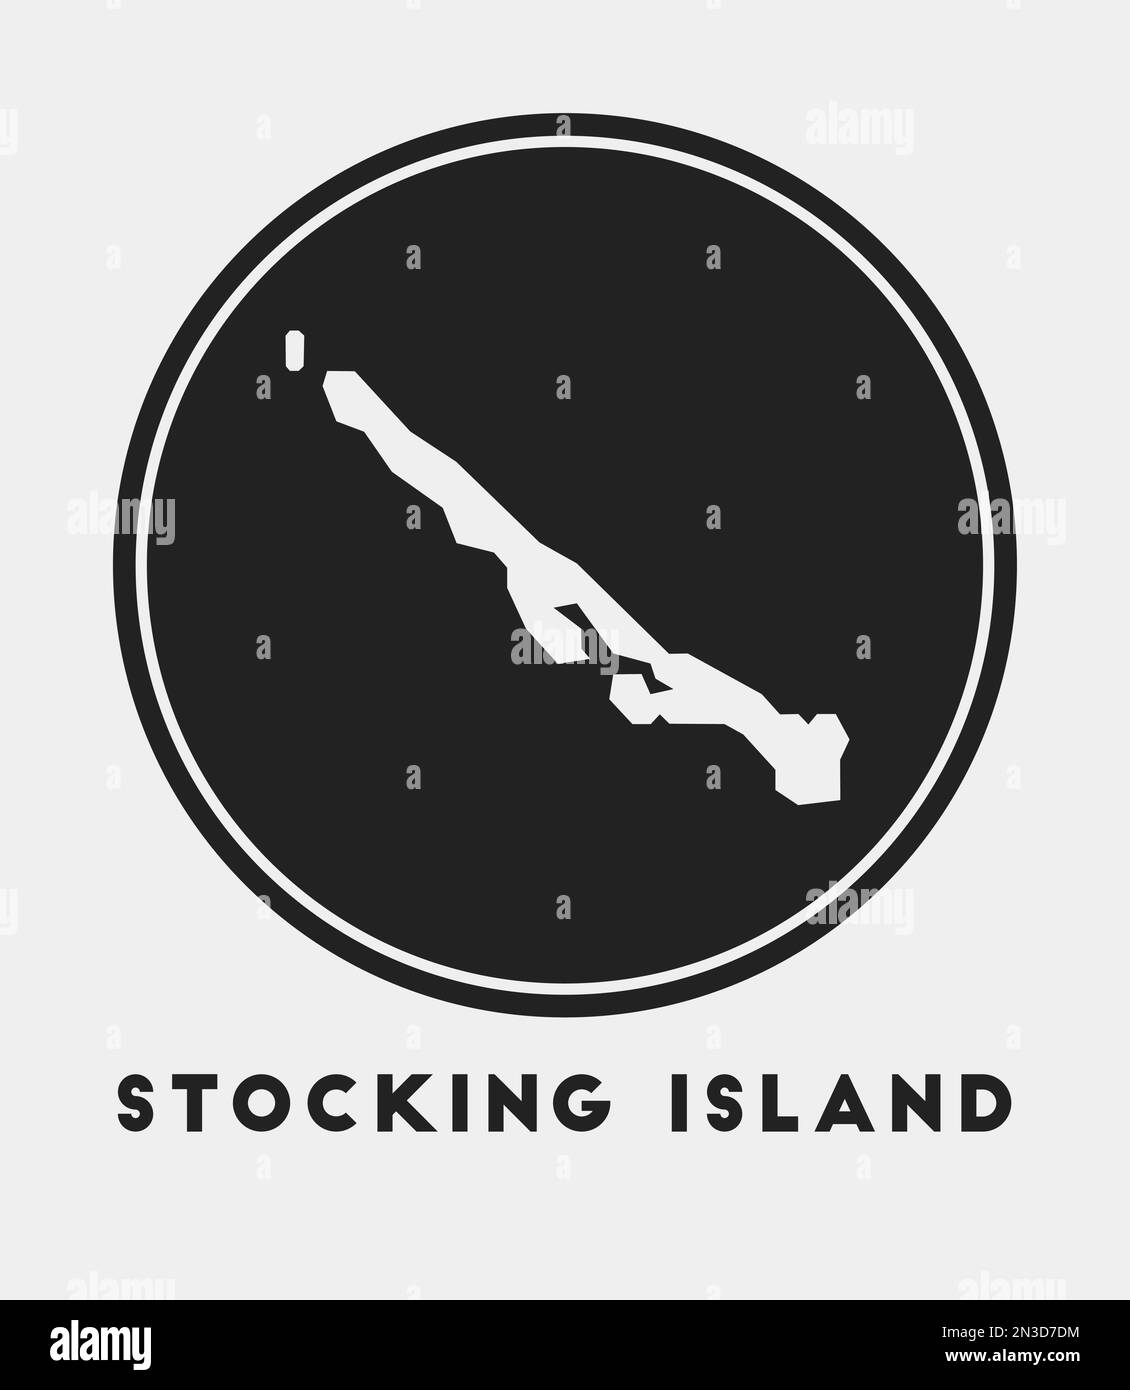 Stocking Island icon. Round logo with map and title. Stylish Stocking Island badge with map. Vector illustration. Stock Vector